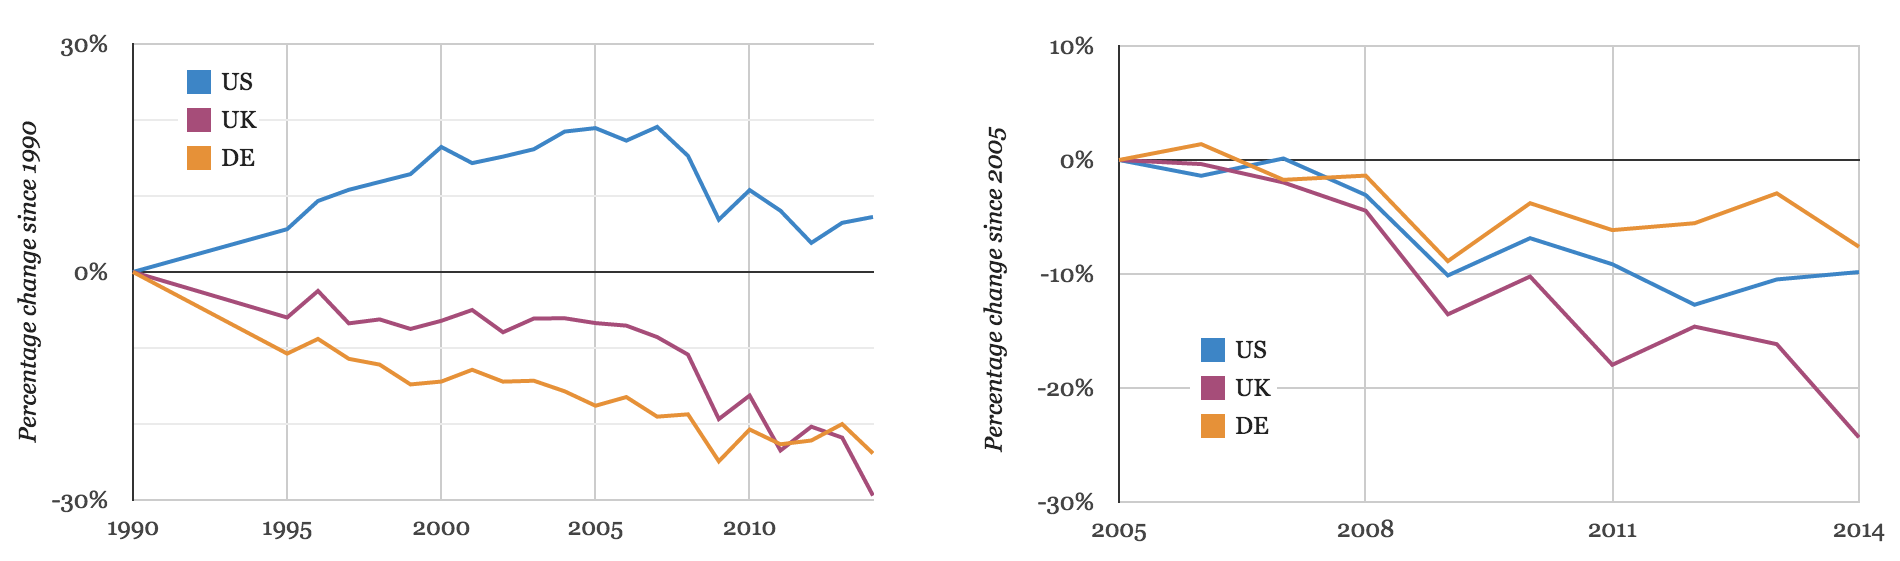 Percentage change in carbon dioxide emissions since 1990 and 2005, in the US, UK and Germany. 